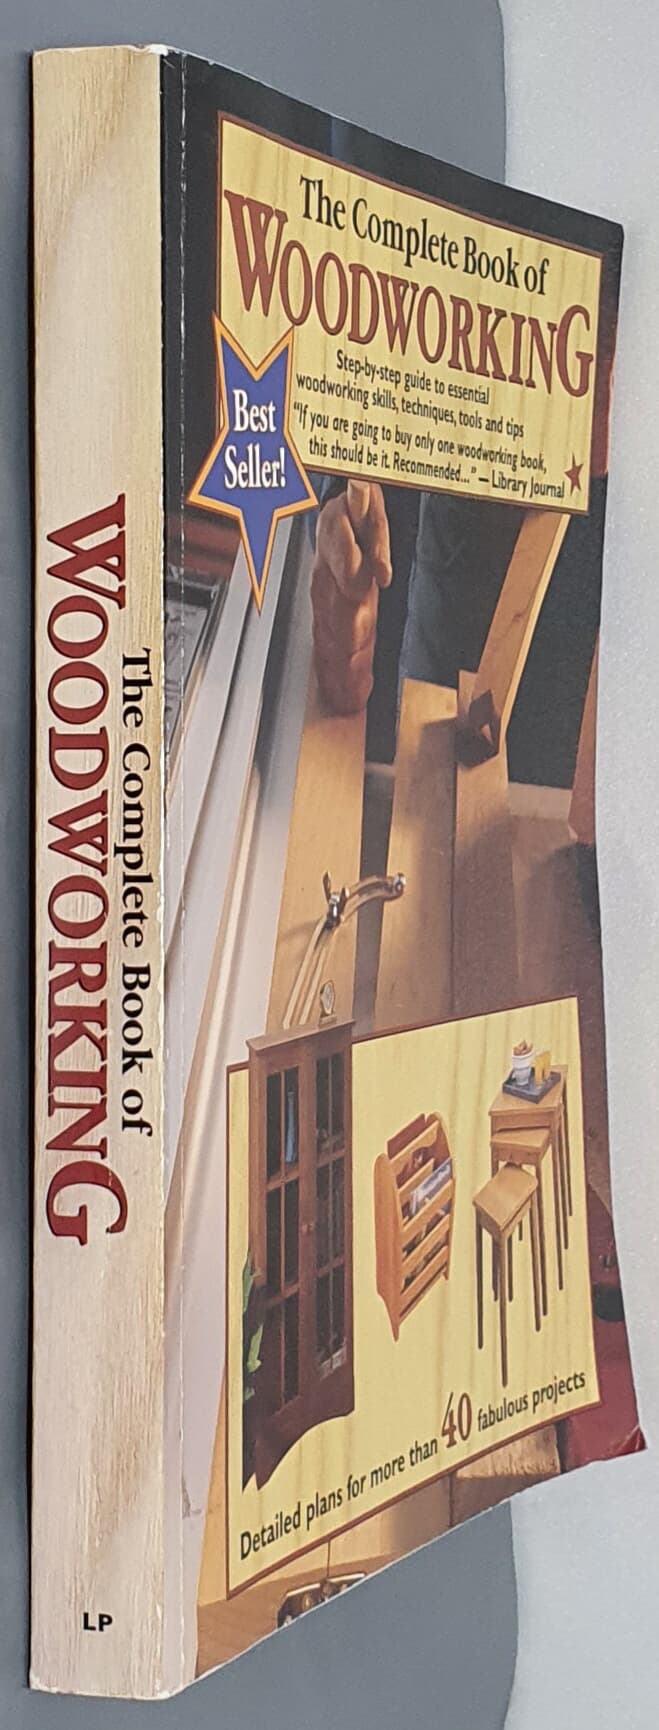 The Complete Book of Woodworking: Step-By-Step Guide to Essential Woodworking Skills, Techniques and Tips 